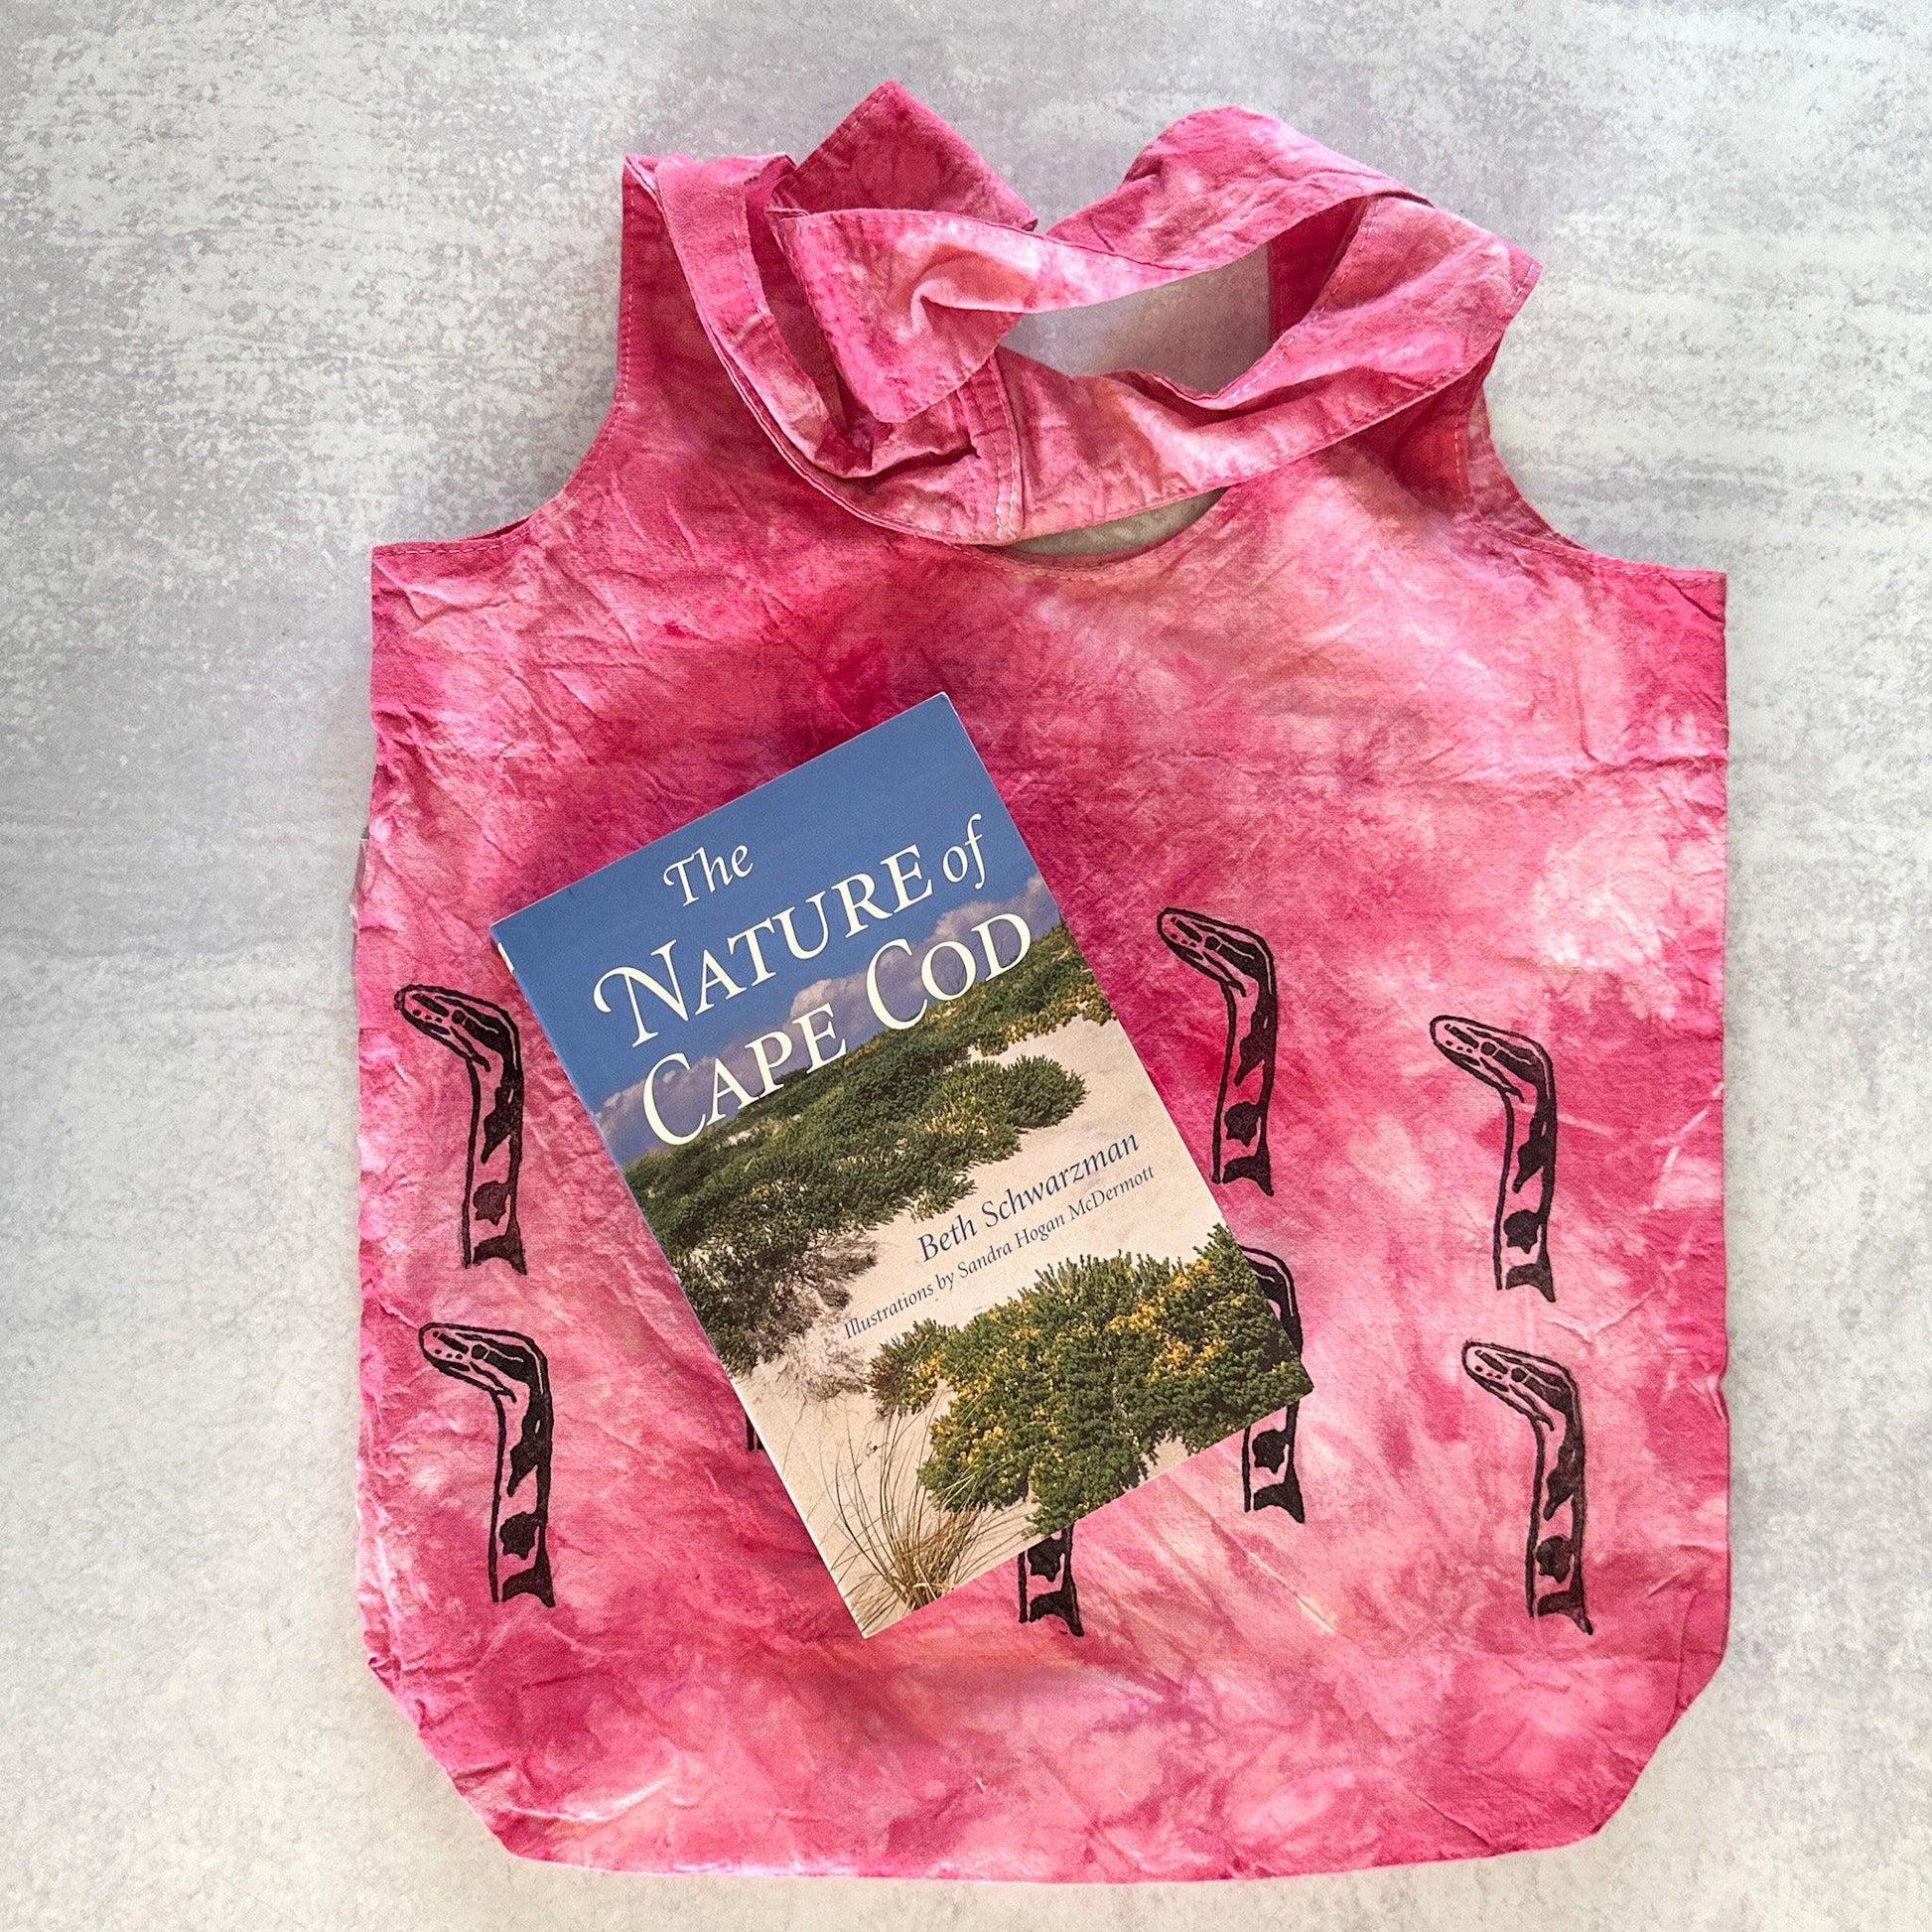 Red/Pink Tie-dye Periscoping Ball Python Tote Bag - The Serpentry